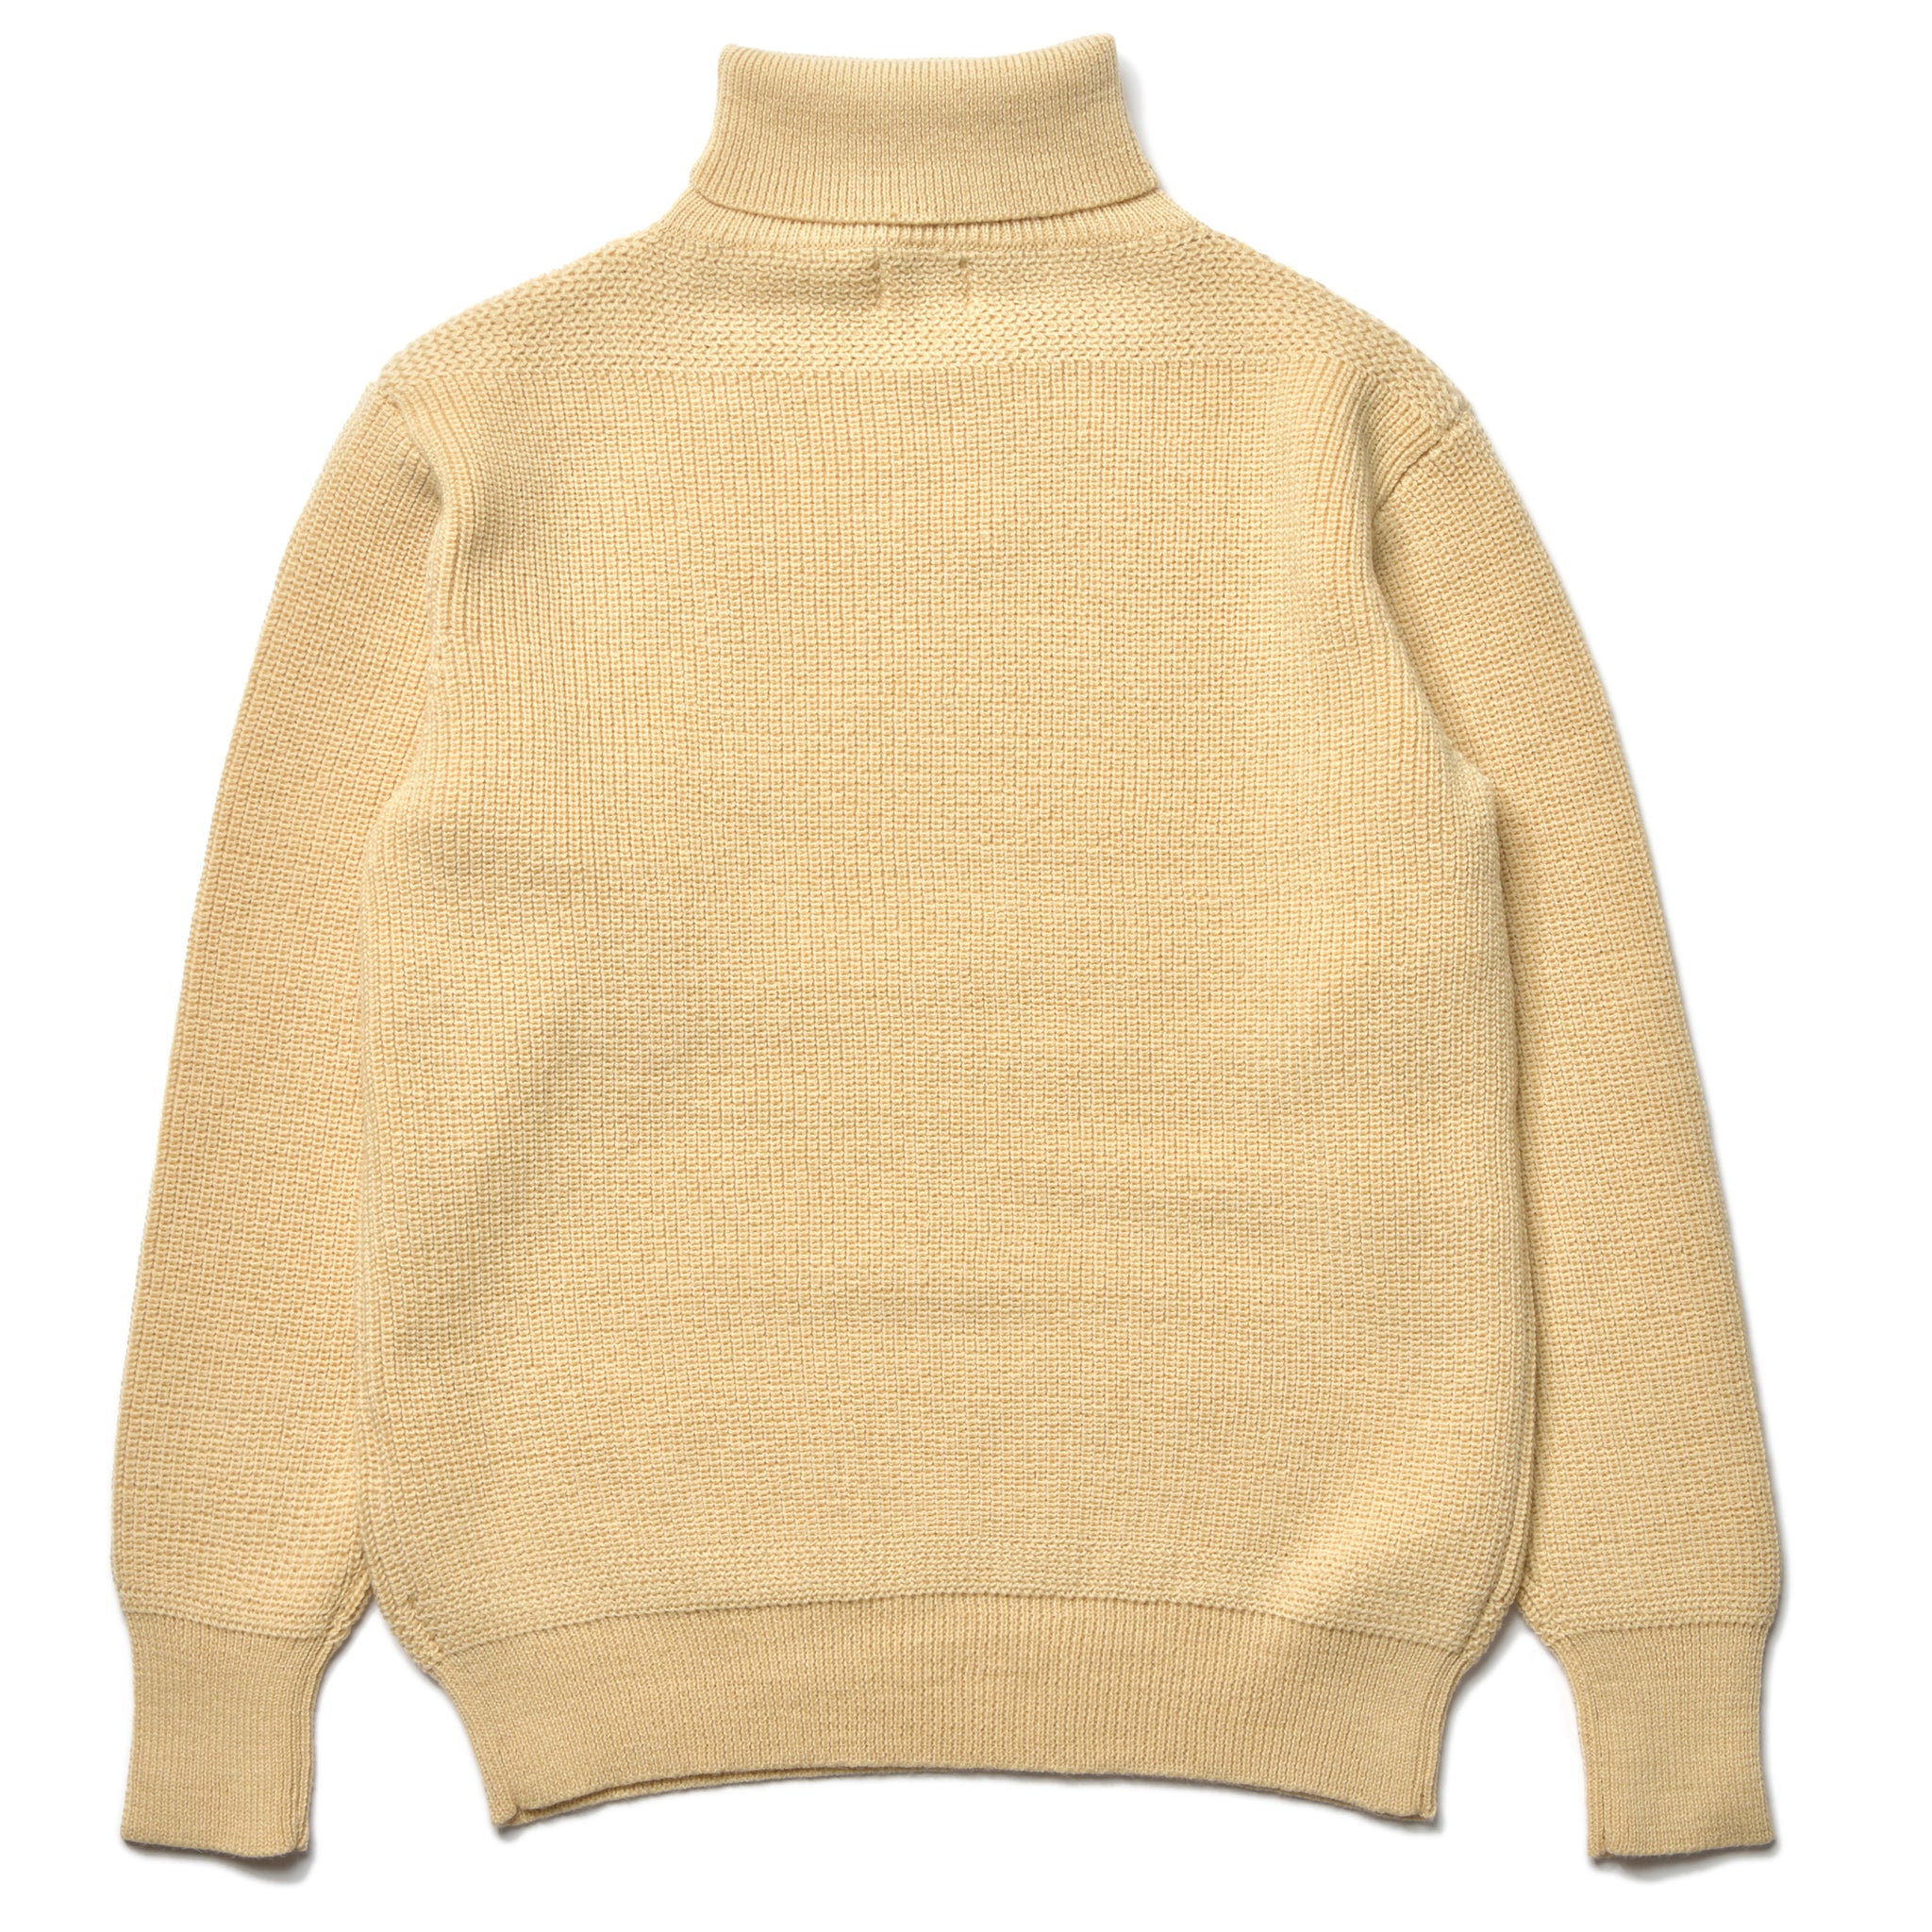 FISHERMAN'S TURTLE NECK SWEATER – The Real McCoy's